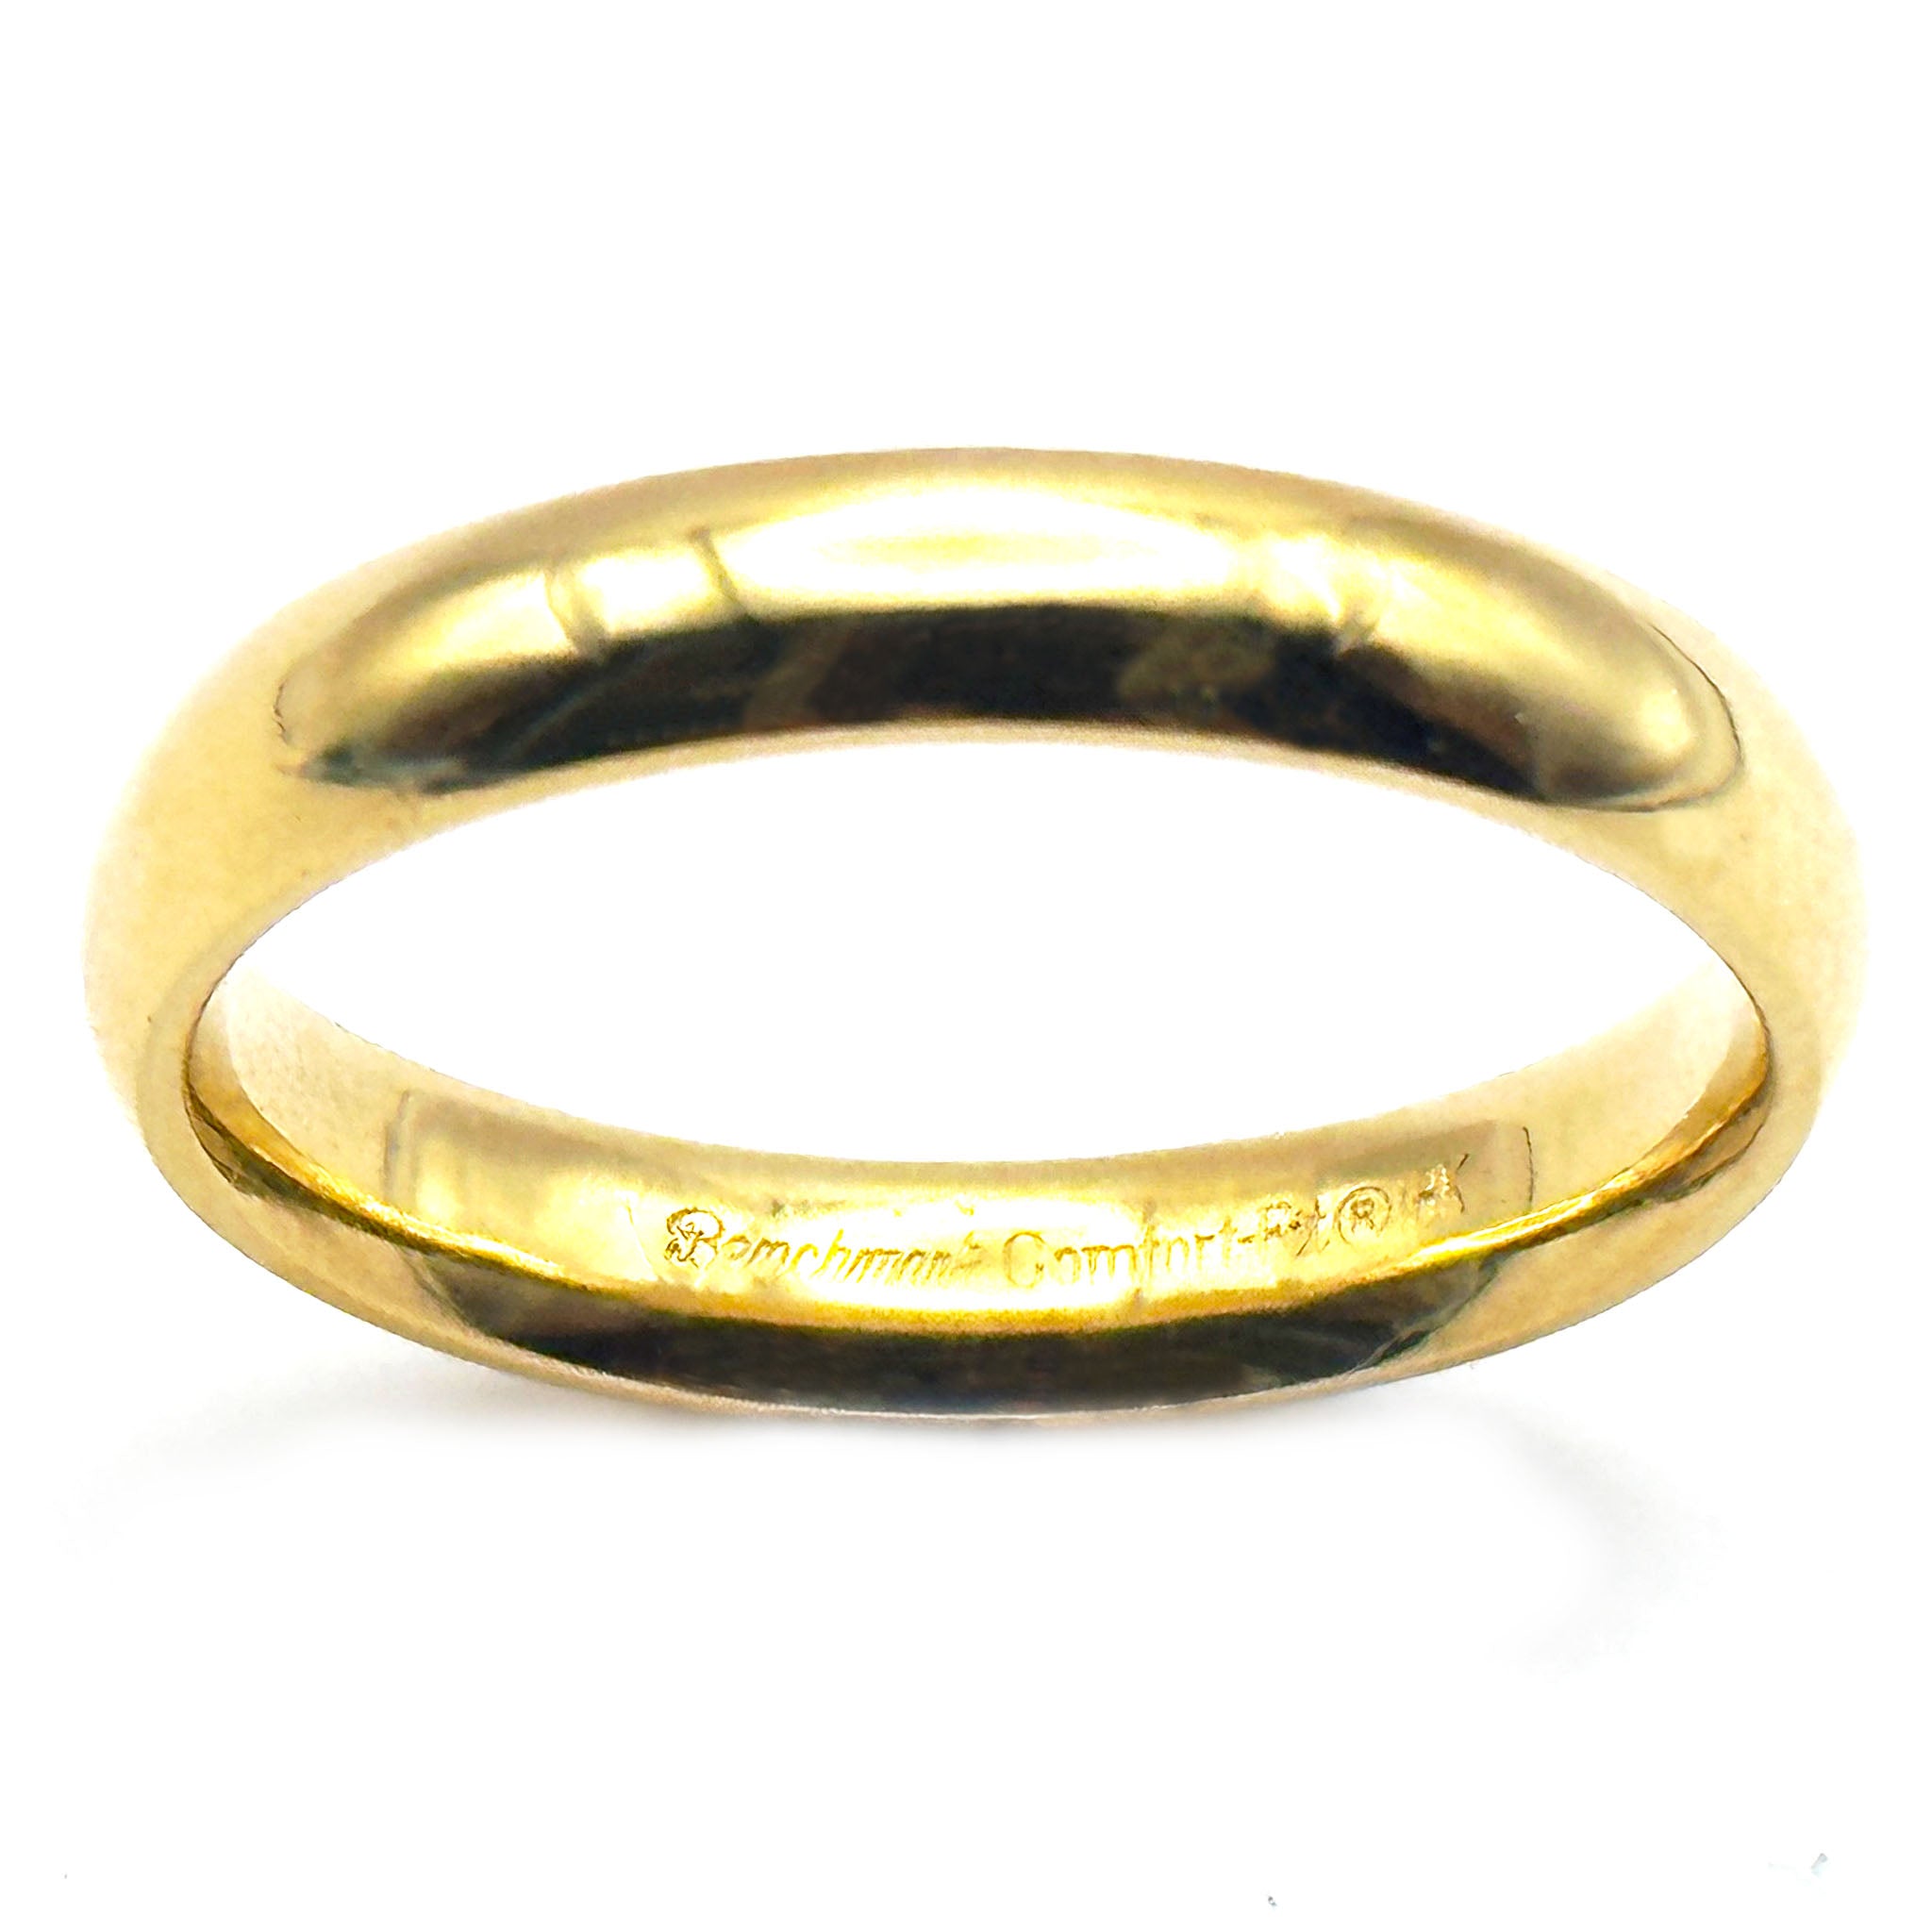 $2800 18Kt Yellow Gold Men's Wedding Band 4mm Size 9.5